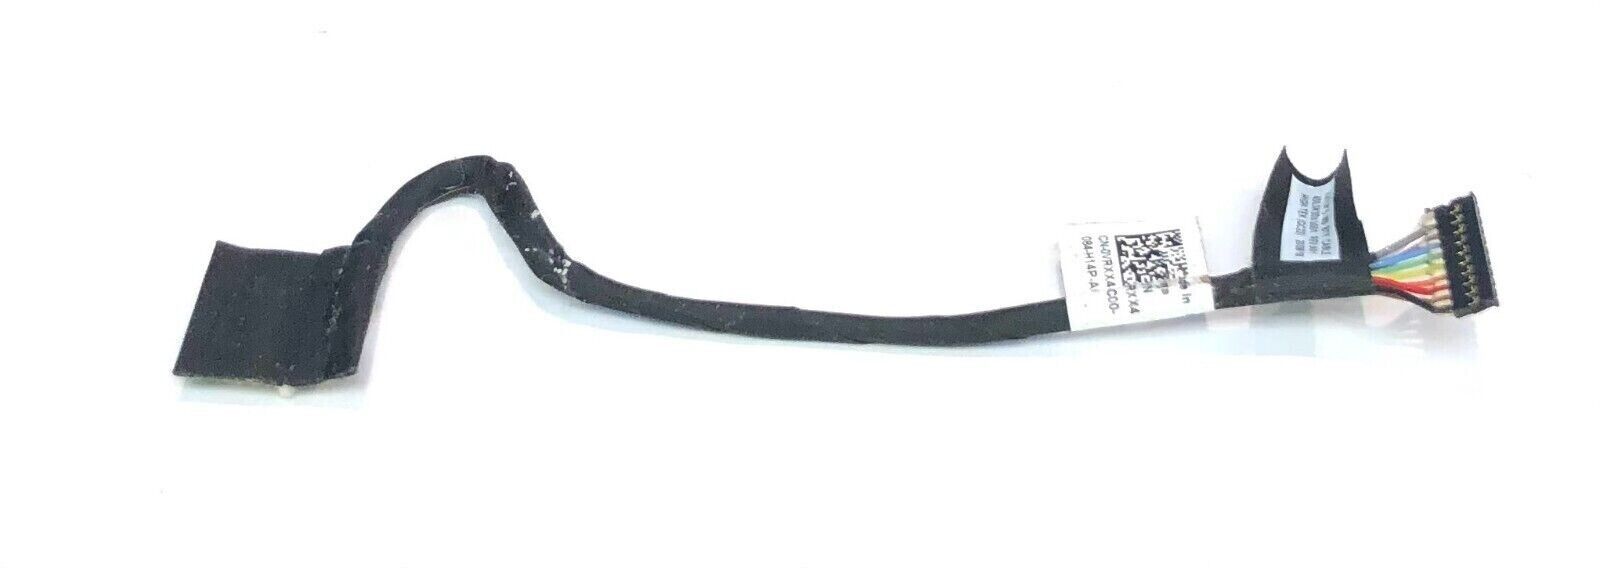 GENUINE DELL INSPIRON 7506 2IN1 LAPTOP BATTERY CABLE VRXX4 0VRXX4 NEW